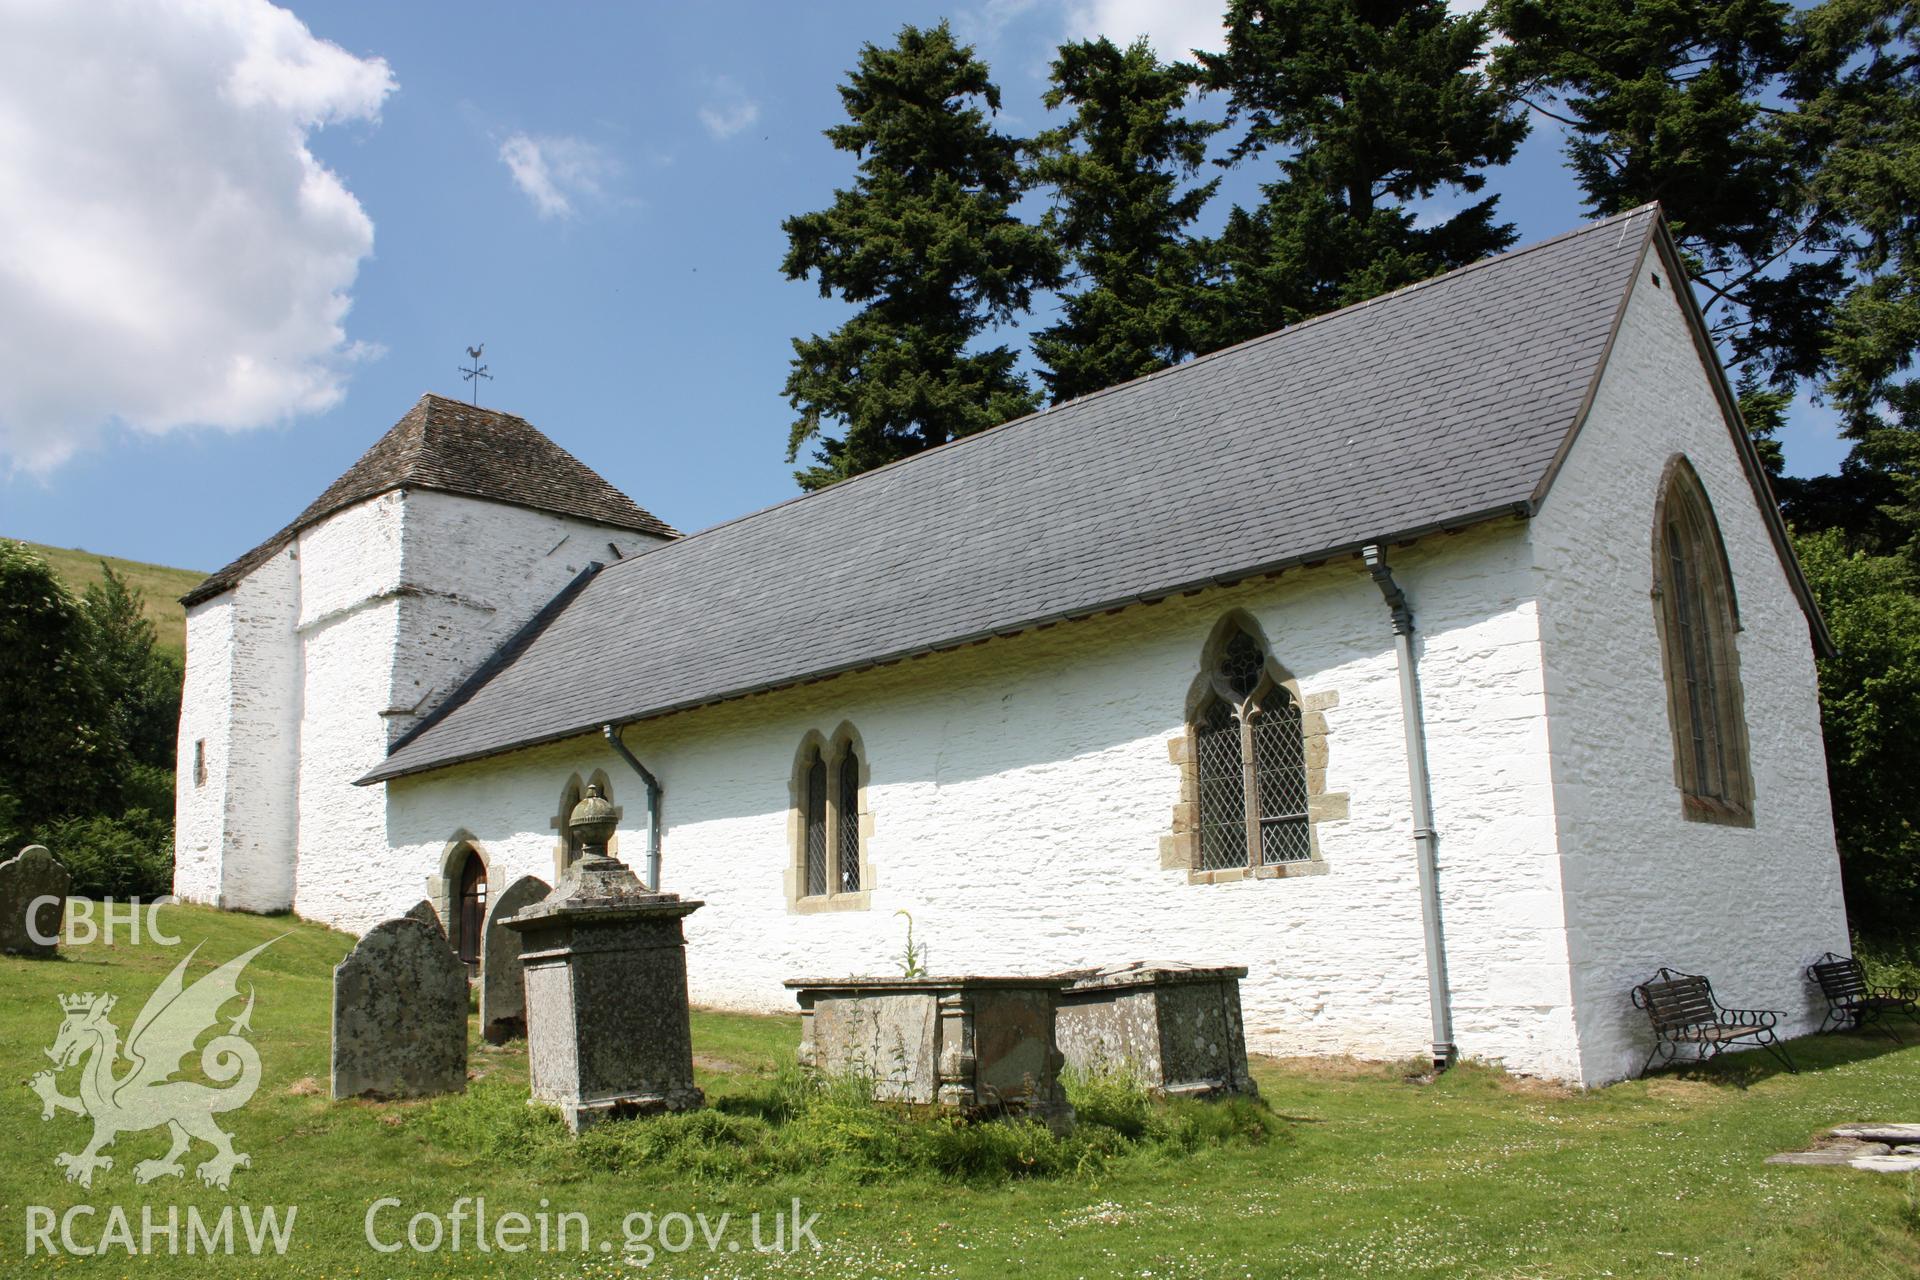 St Mary's Church, Pilleth. Exterior view looking north-west.